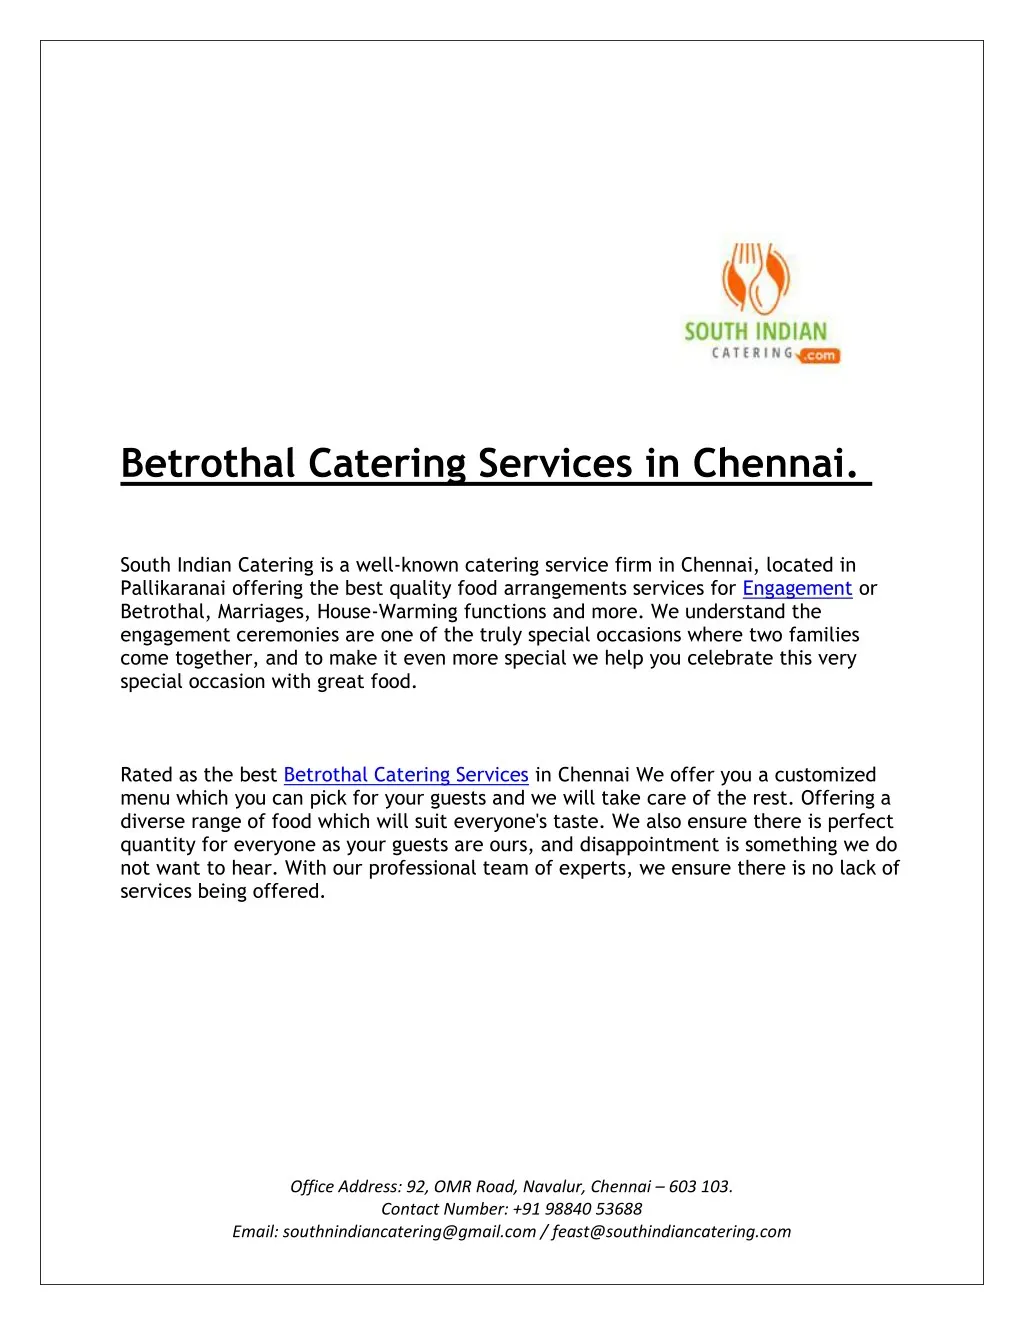 betrothal catering services in chennai south